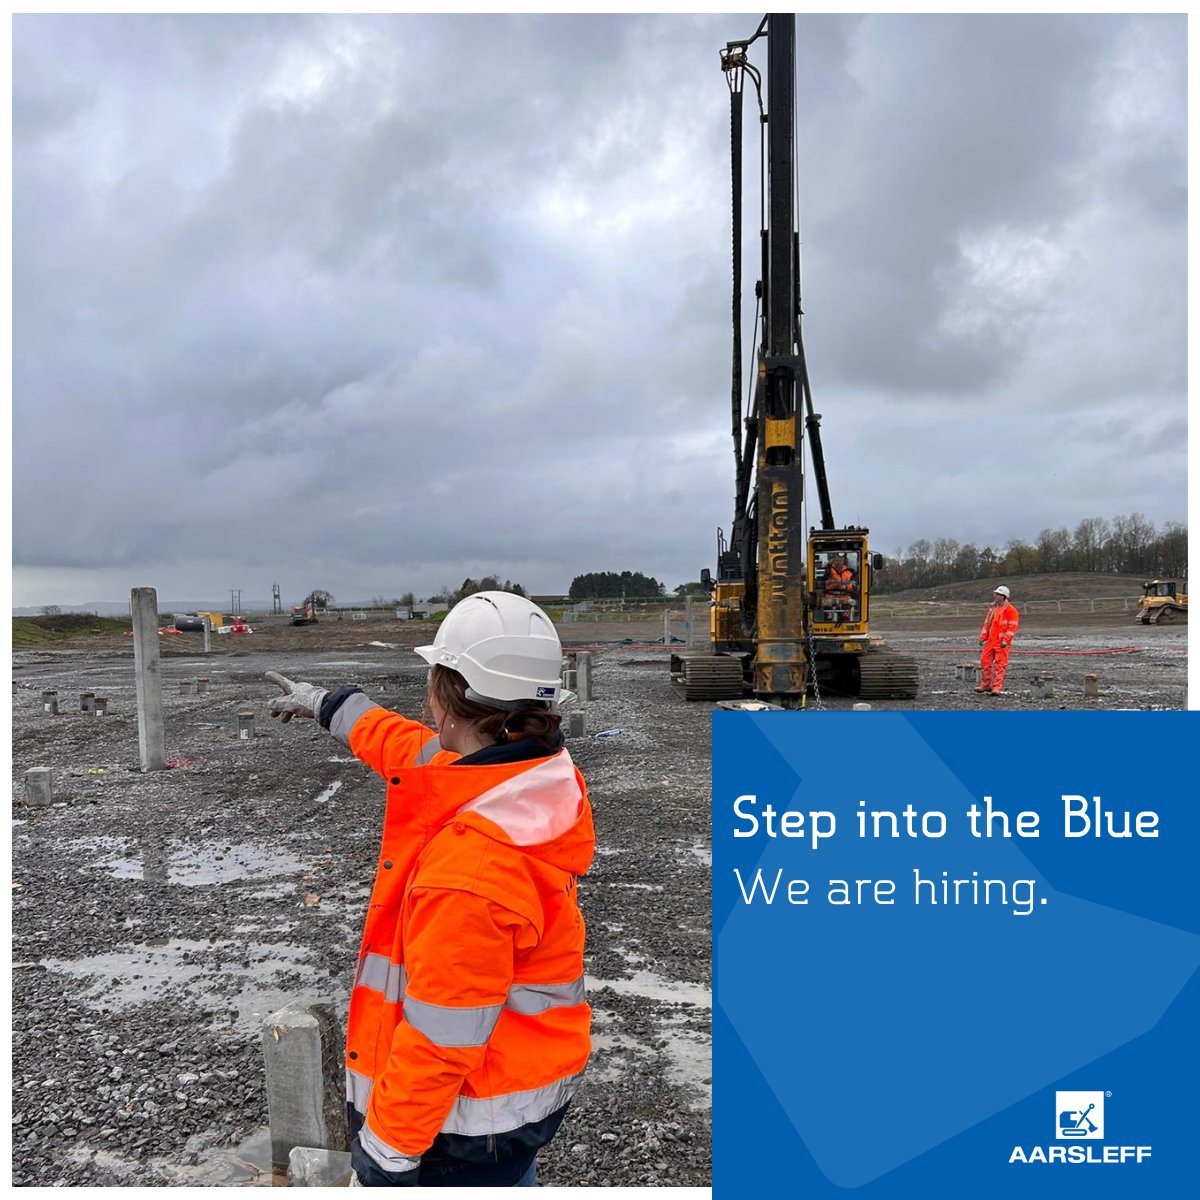 Ready to start doing things differently? We're hiring for a range of roles across our offices and sites. Check out our available jobs at aarsleff.co.uk/current-vacanc… 

#aarsleff #jobs #stepintotheblue #recruitment #newarkjobs #newcastlejobs #constructionjobs